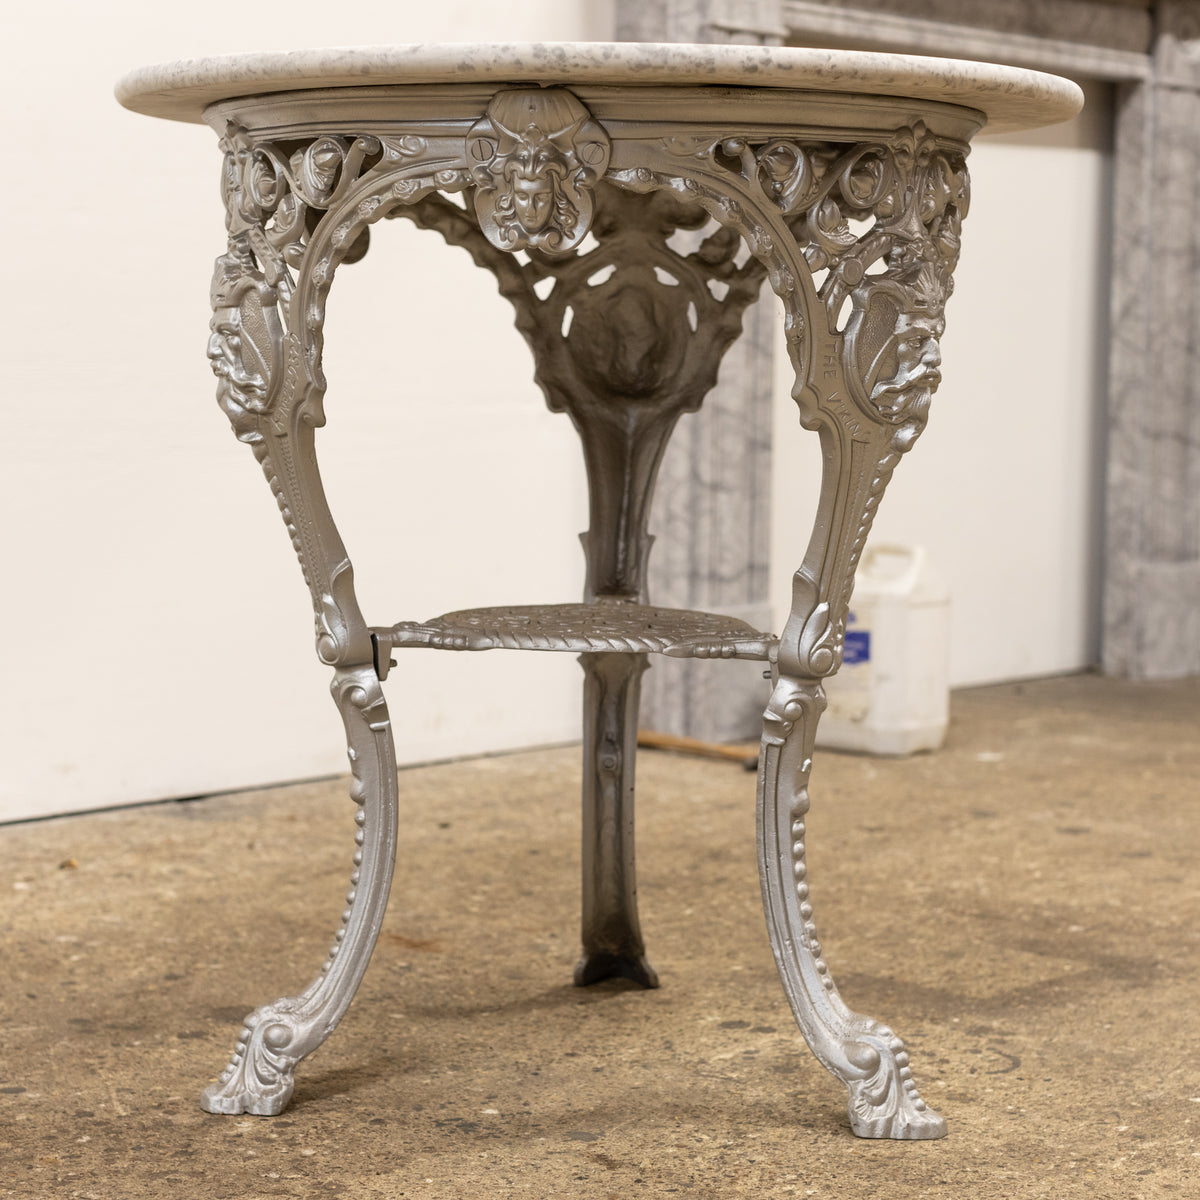 Antique Cast Iron Round Table with Marble Top | The Viking | The Architectural Forum